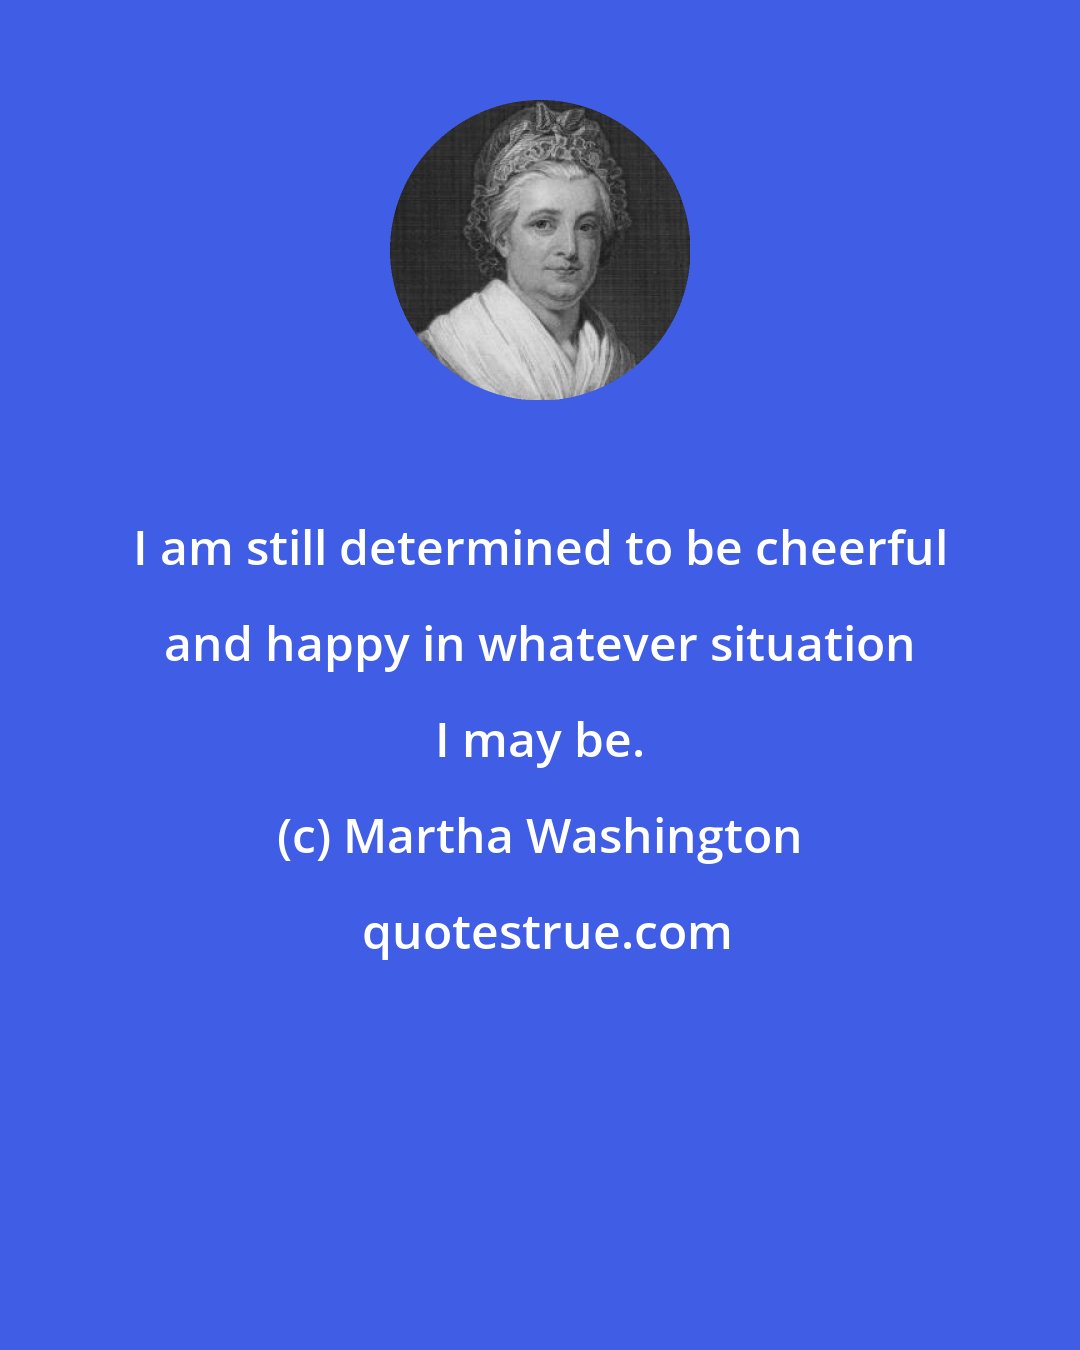 Martha Washington: I am still determined to be cheerful and happy in whatever situation I may be.